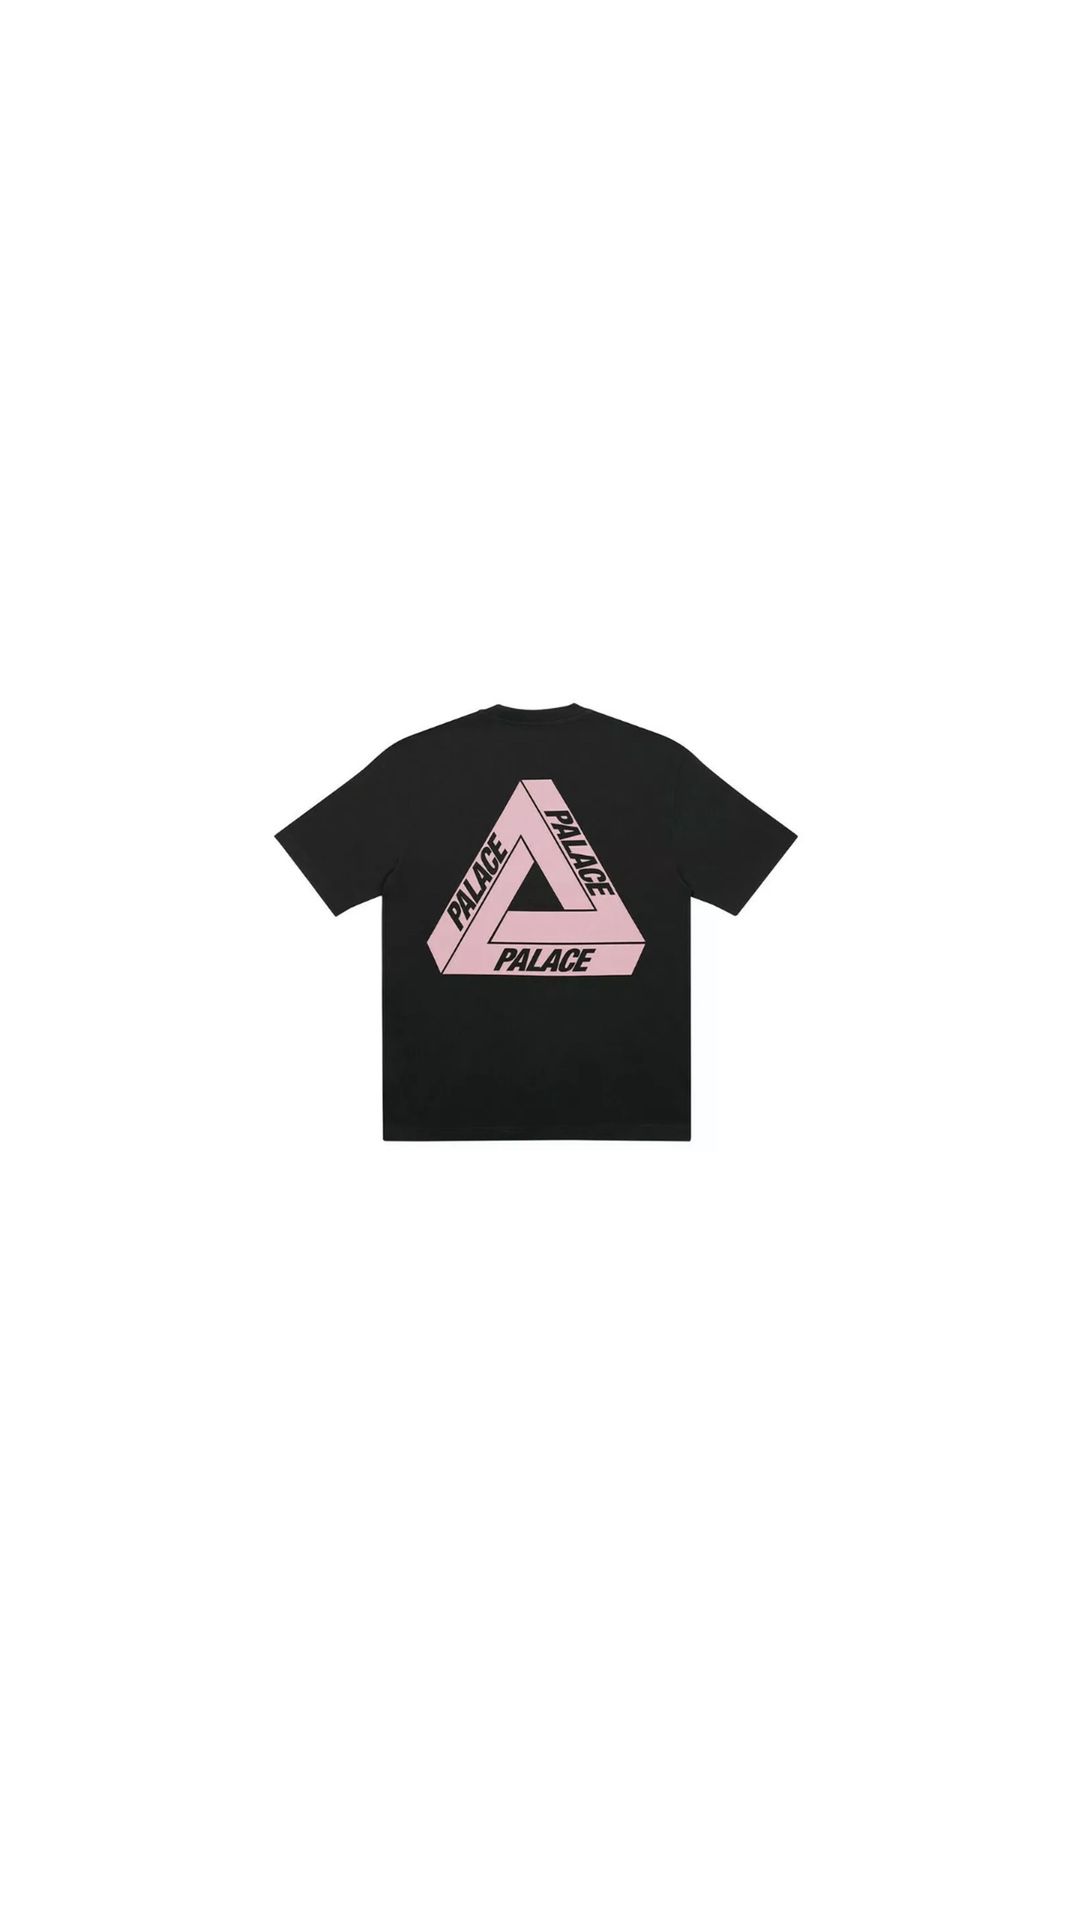 Palace SkateBoarding Tri-To-Help Tee Size L